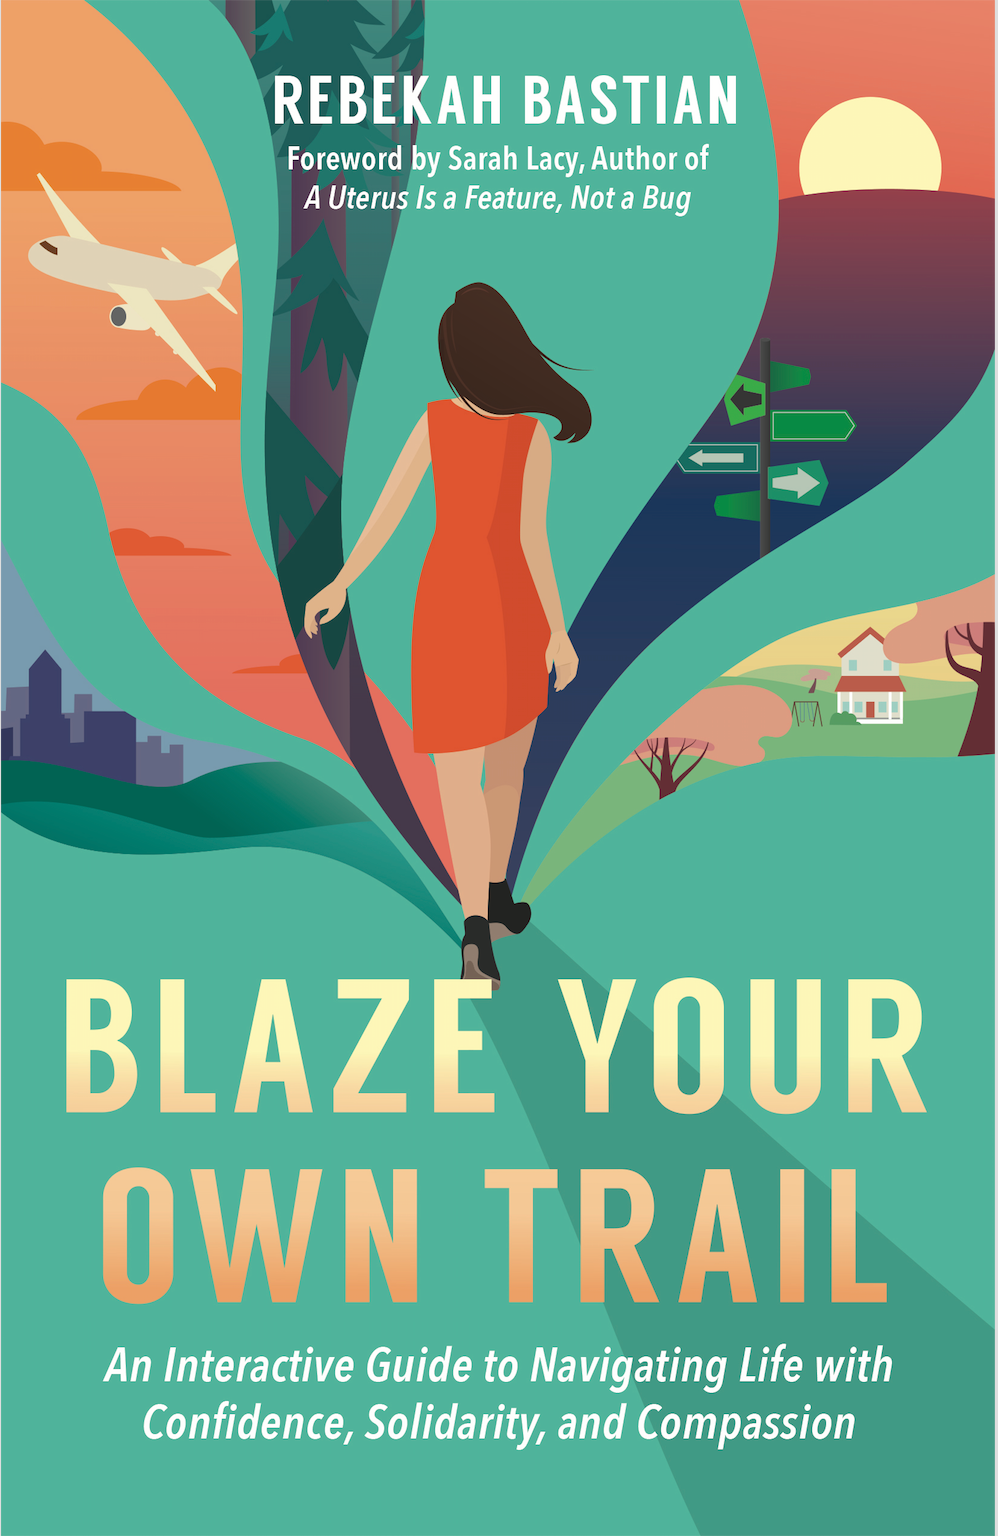 Cover of Rebekah Bastian’s book “Blaze Your Own Trail” 